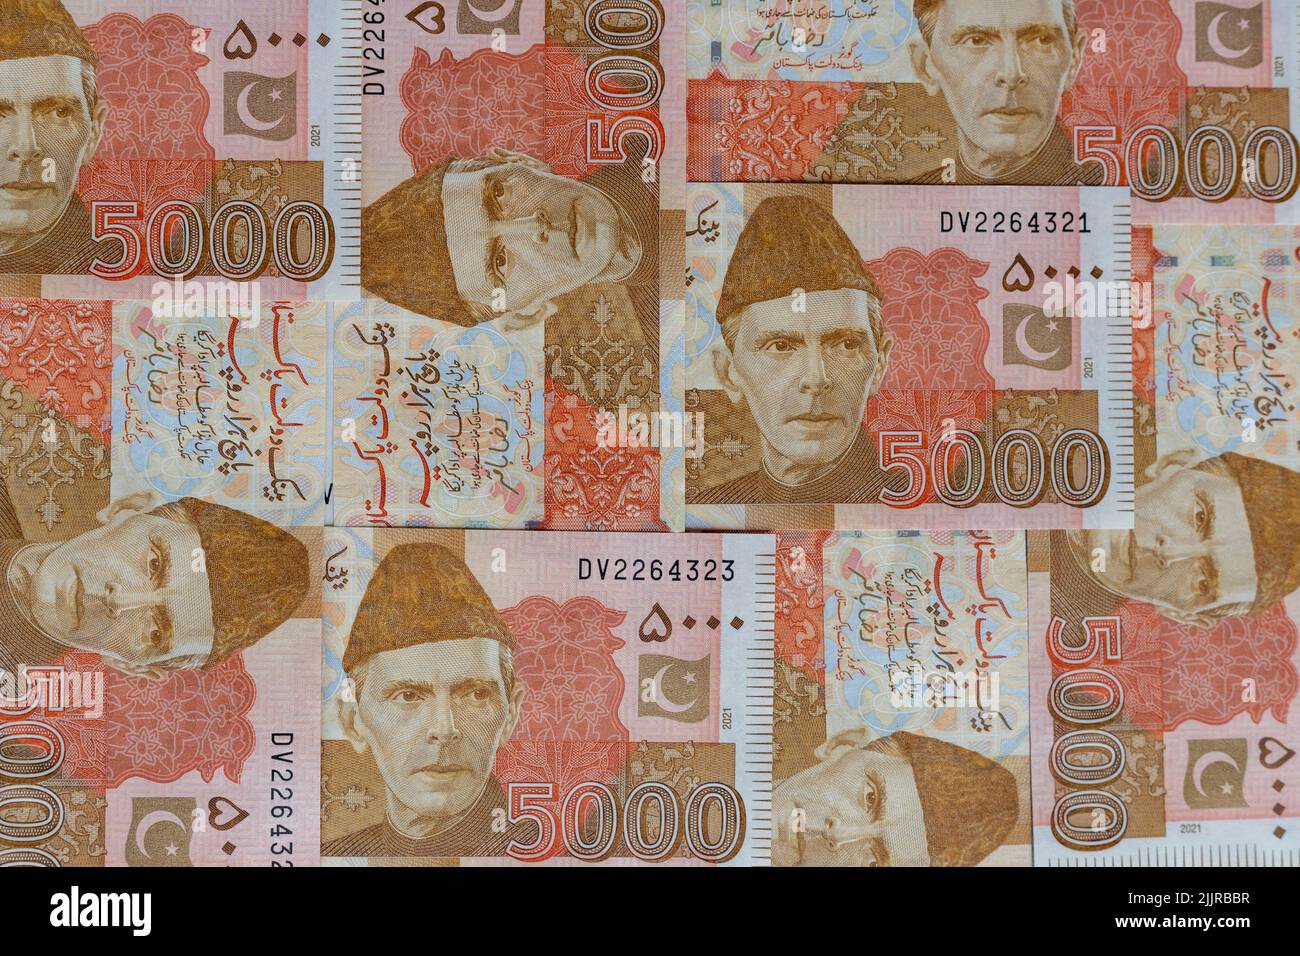 Five thousand rupees Pakistani currency notes Stock Photo